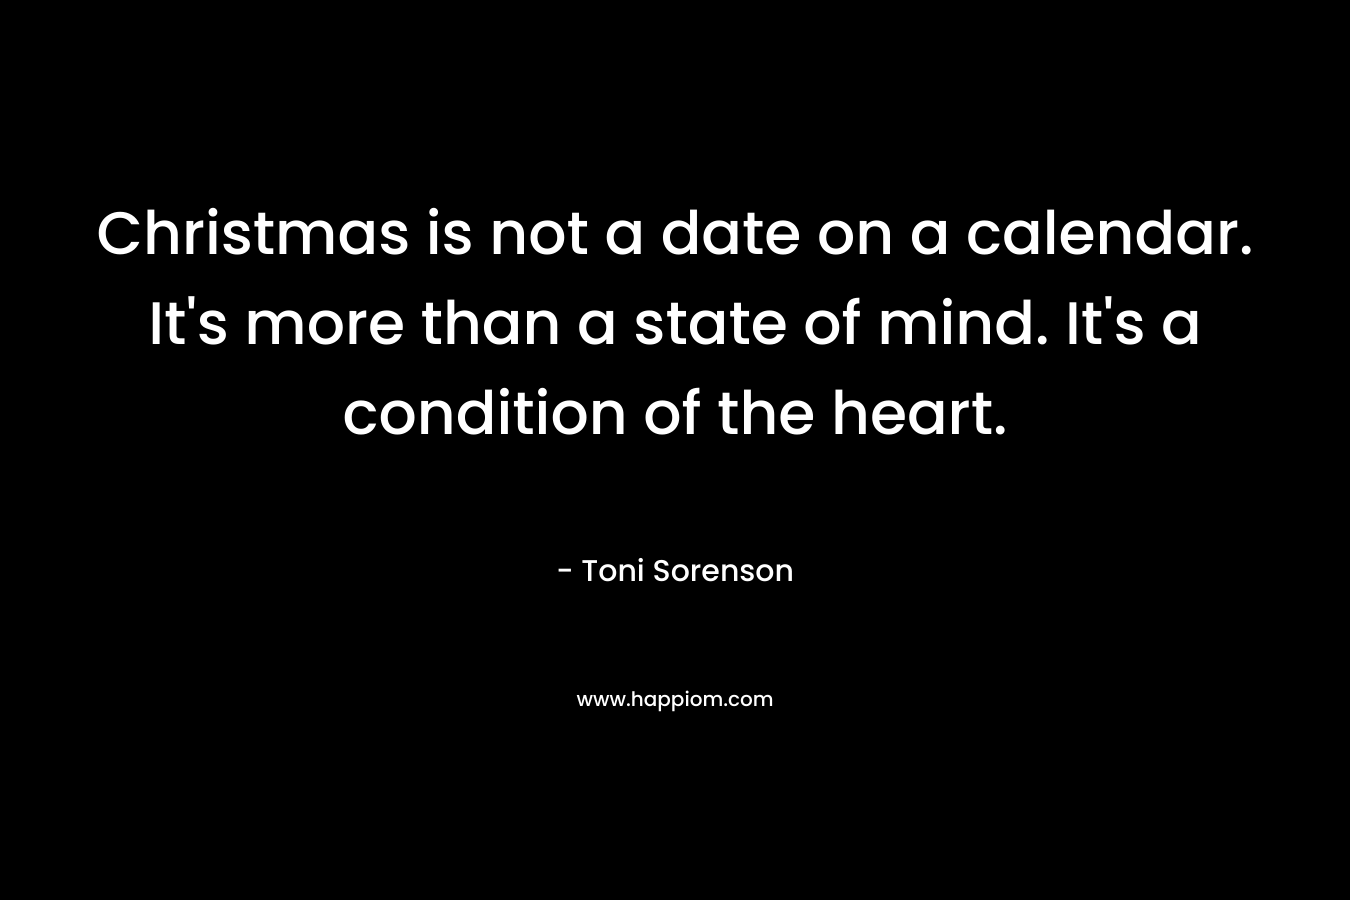 Christmas is not a date on a calendar. It's more than a state of mind. It's a condition of the heart.